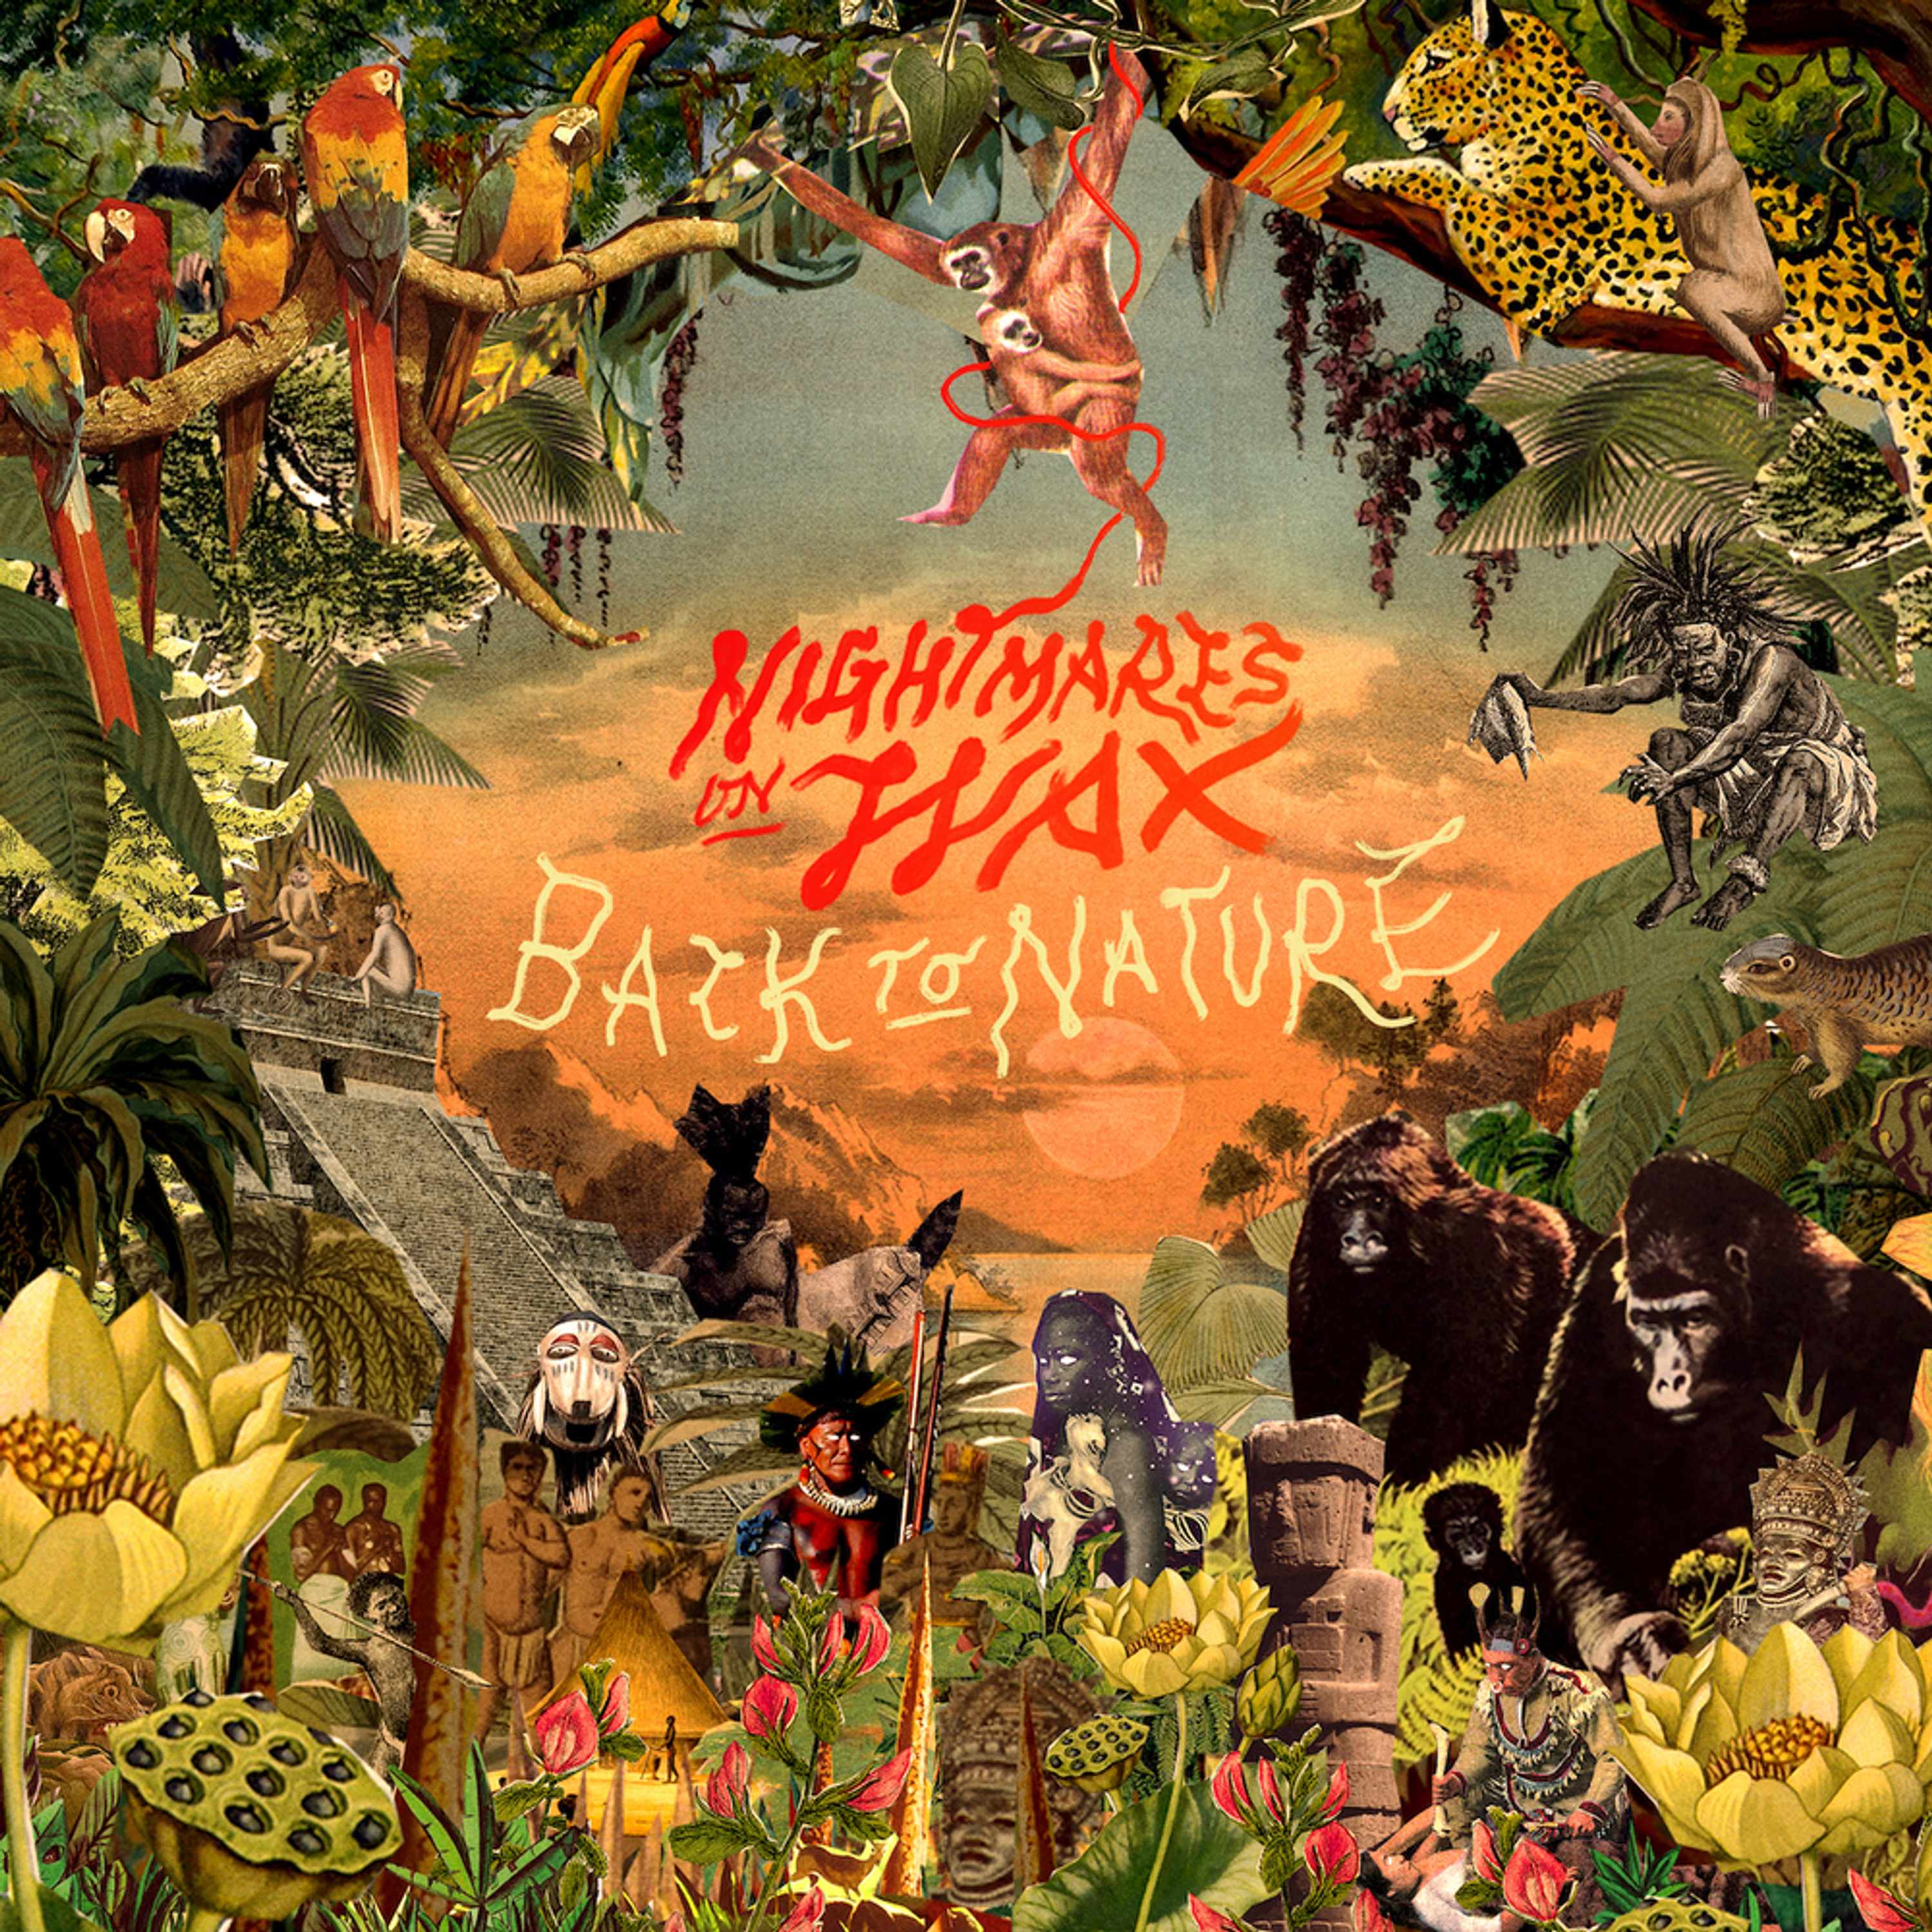 Nightmares on Wax - Back To Nature